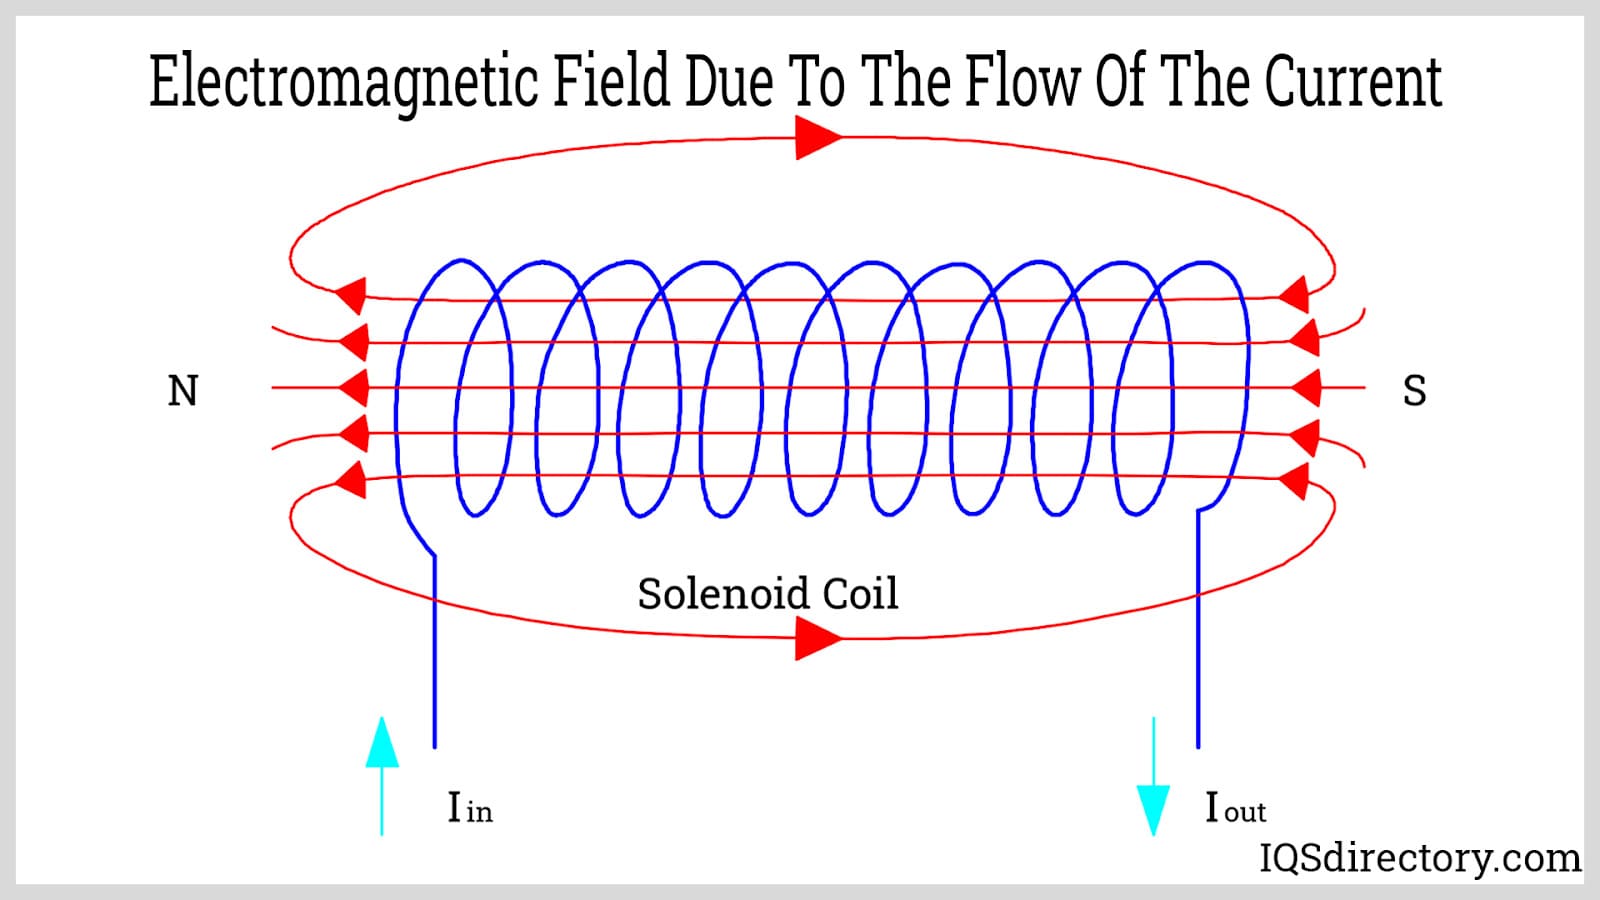 Electromagnetic Field Due To The Flow of The Current